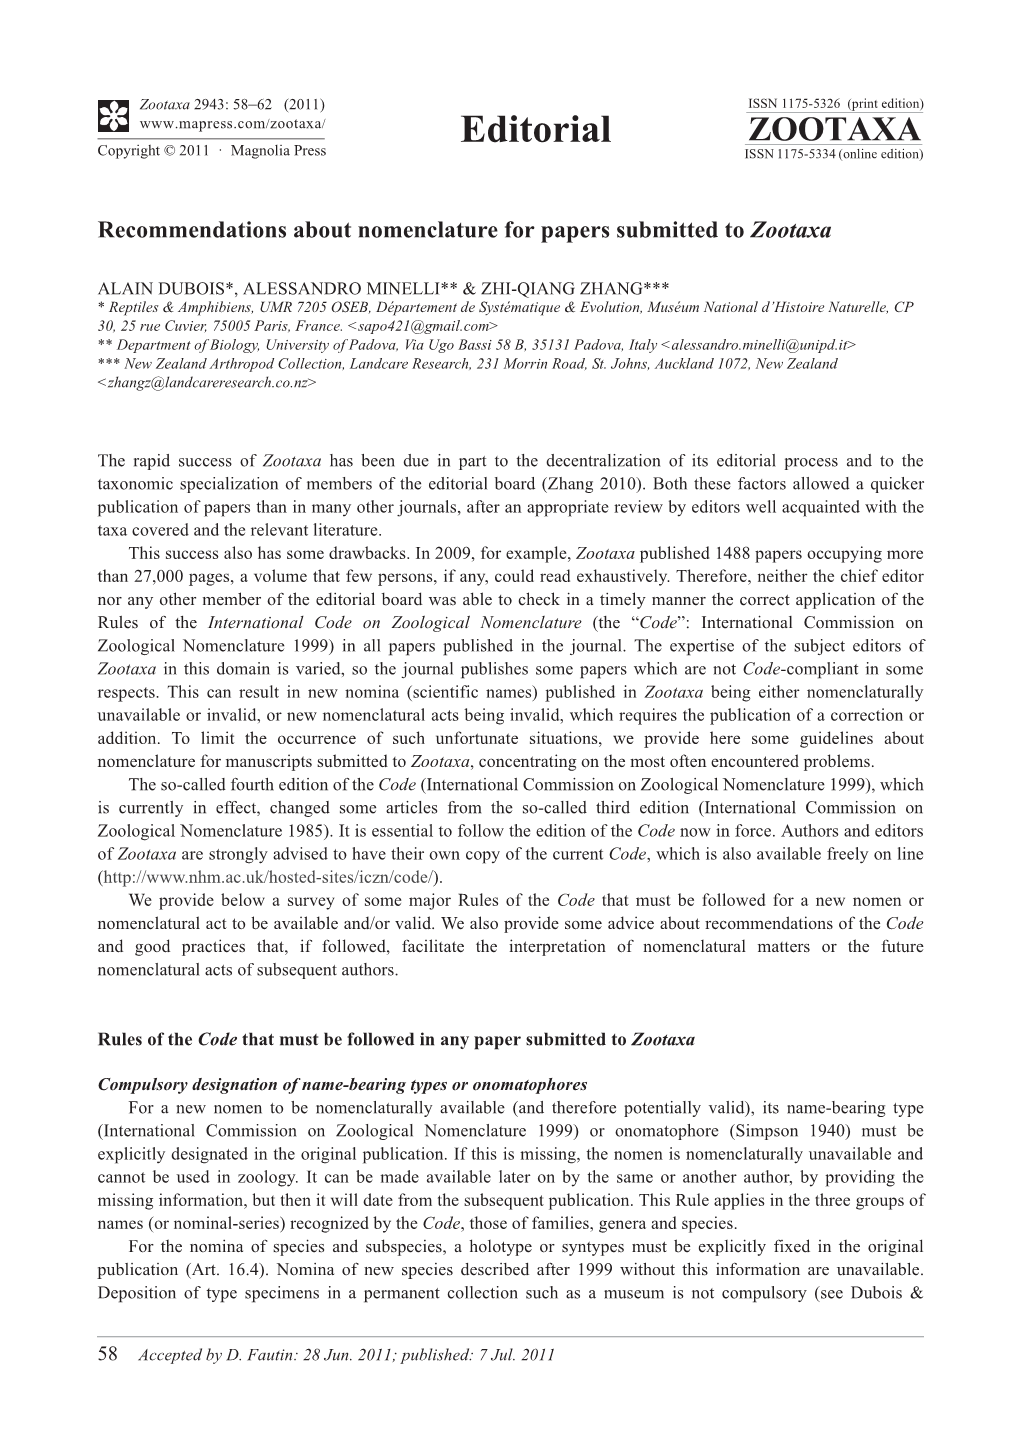 Recommendations About Nomenclature for Papers Submitted to Zootaxa